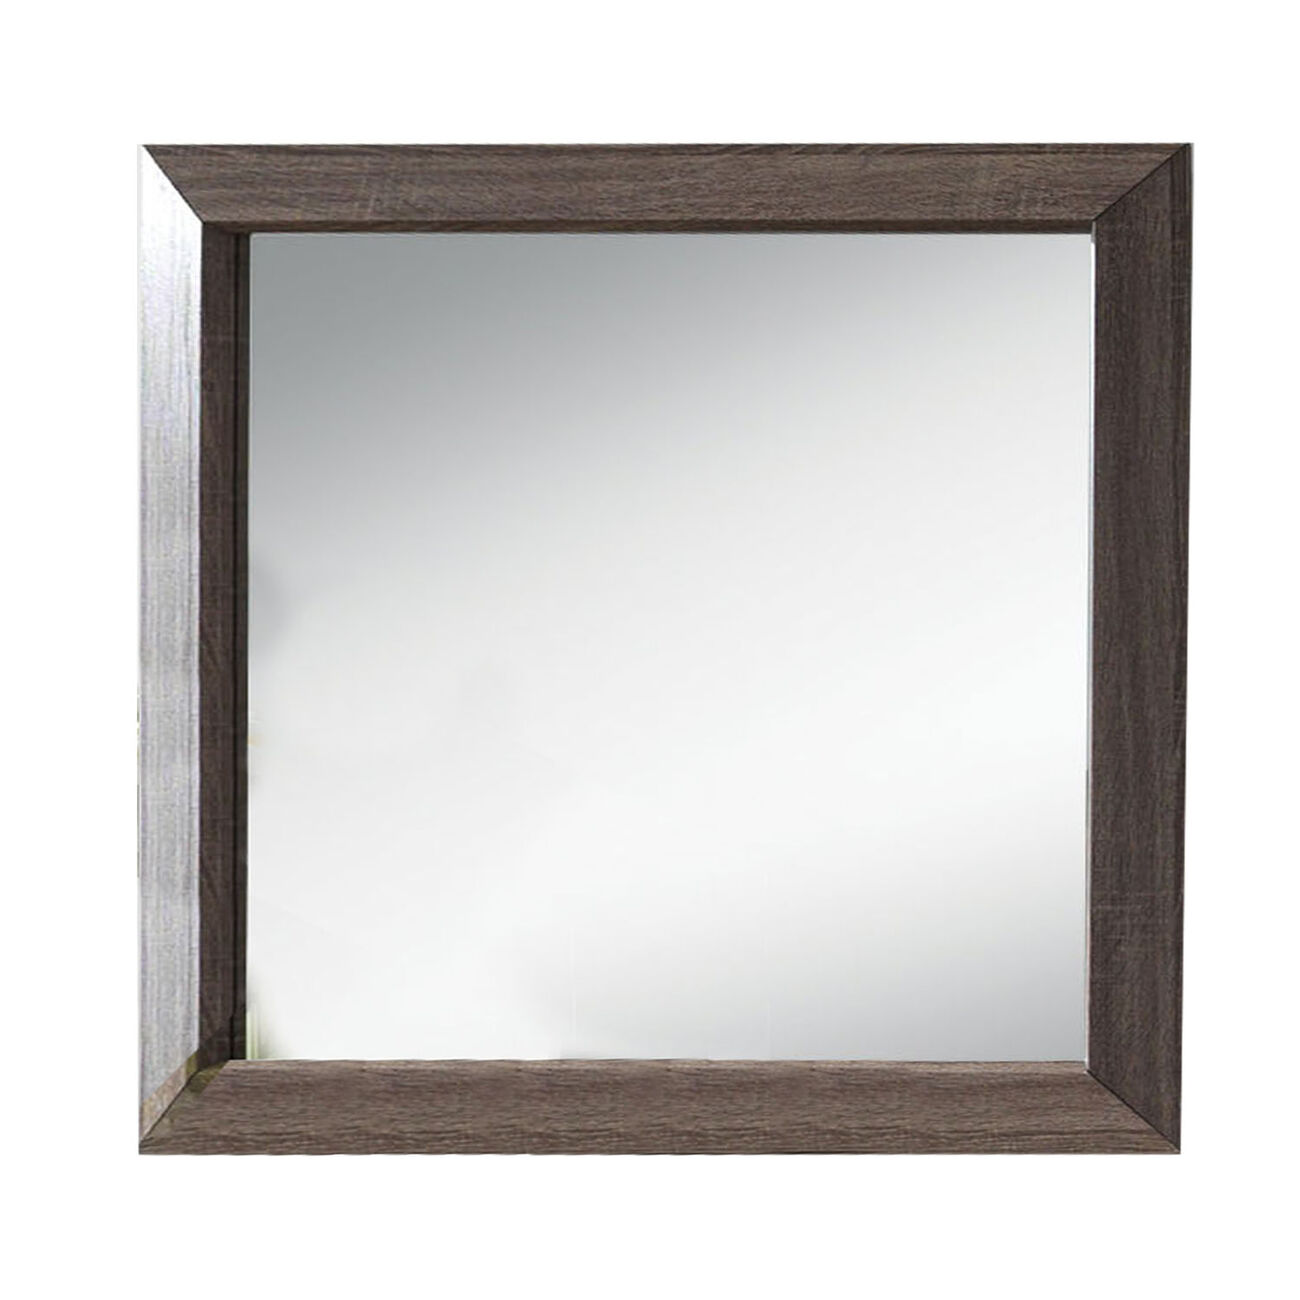 Wooden Clean Lines Framed Mirror with Rectangular Shape,Weathered Gray